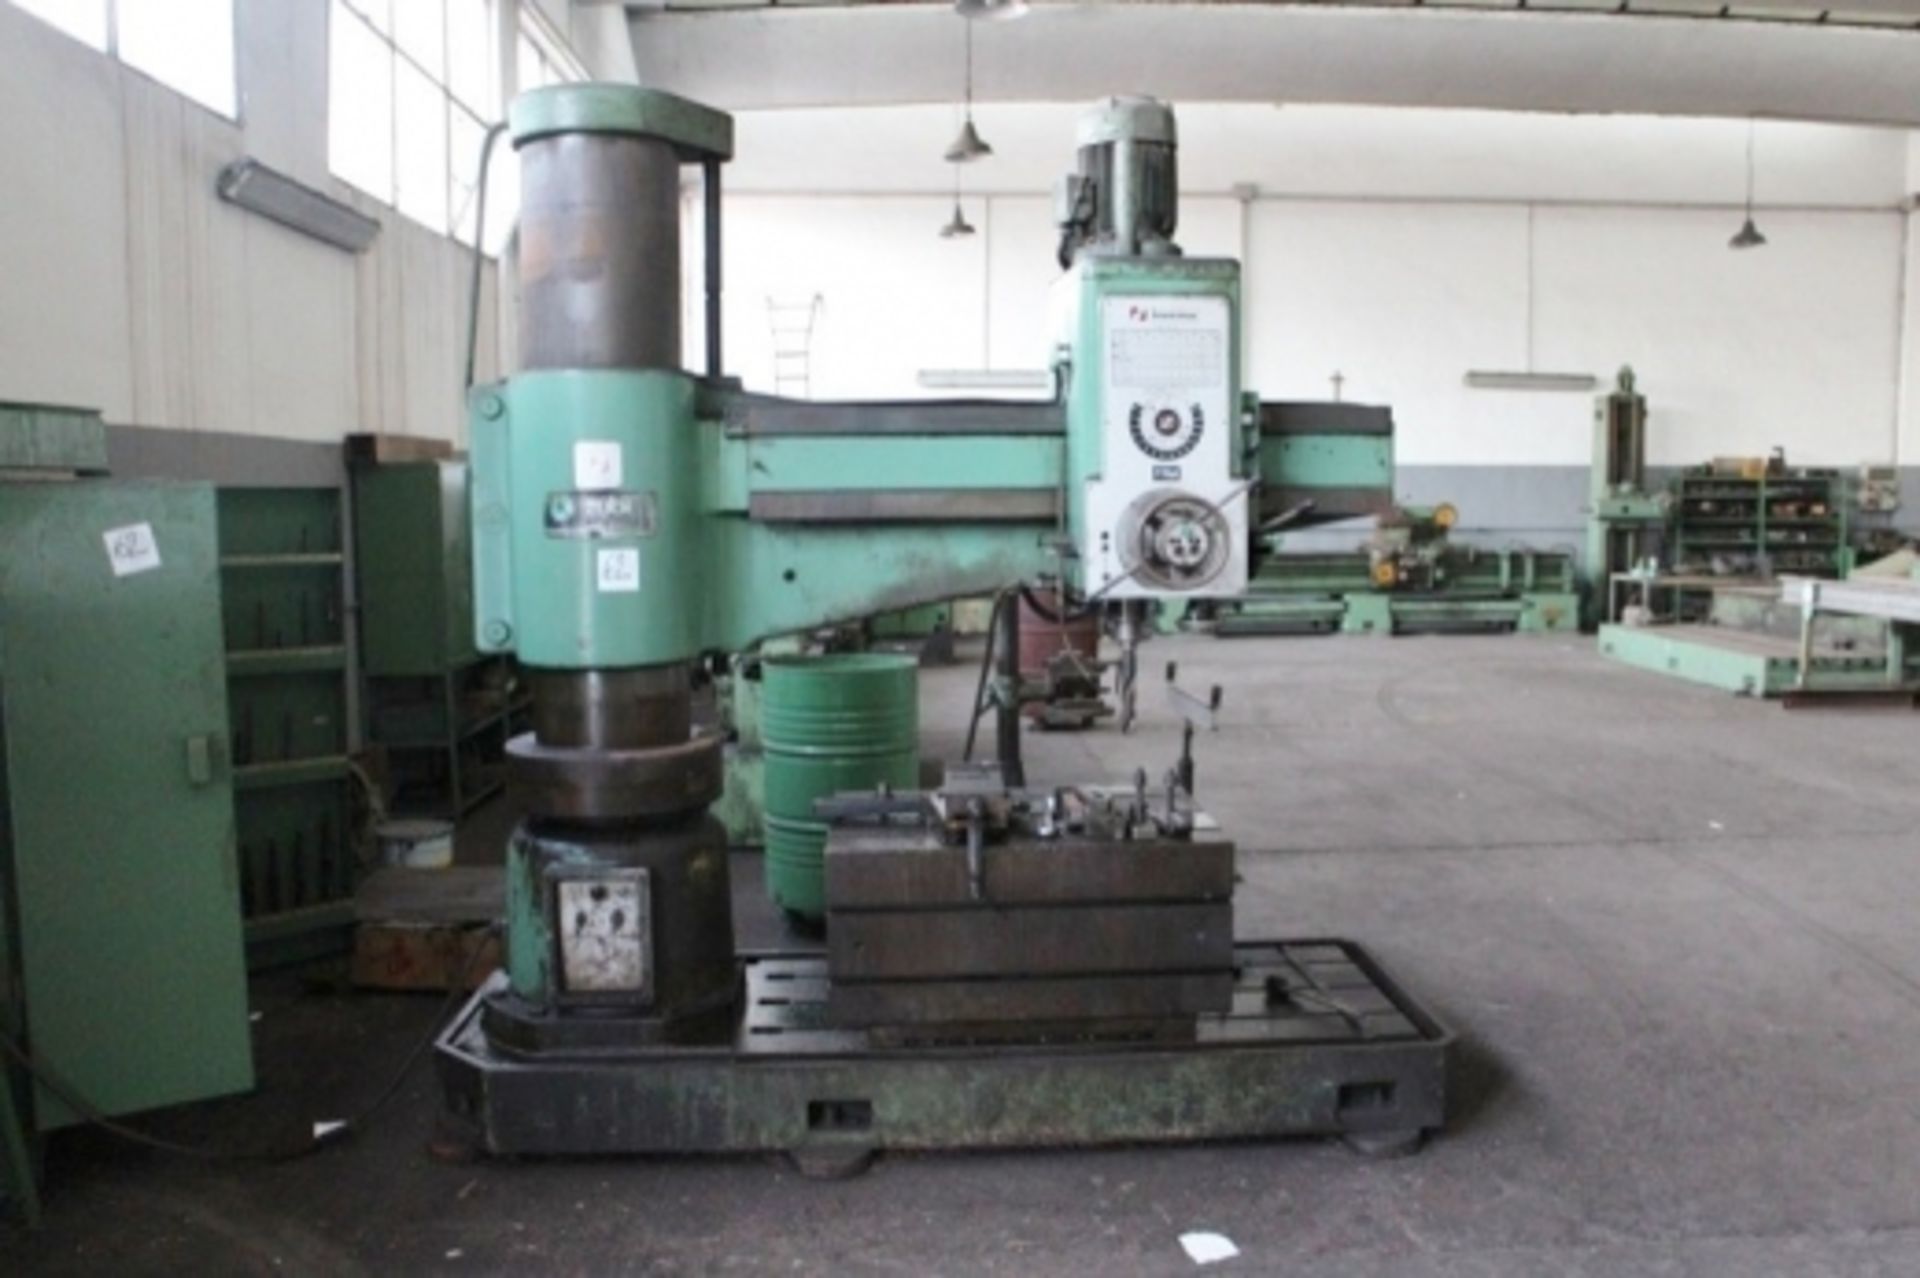 1,RADIAL DRILL BRAND INVEMA, SERIAL NUMBER. 2020B6, COMPLETE WITH CABINET WITH ACCESSORIES Click - Image 3 of 4